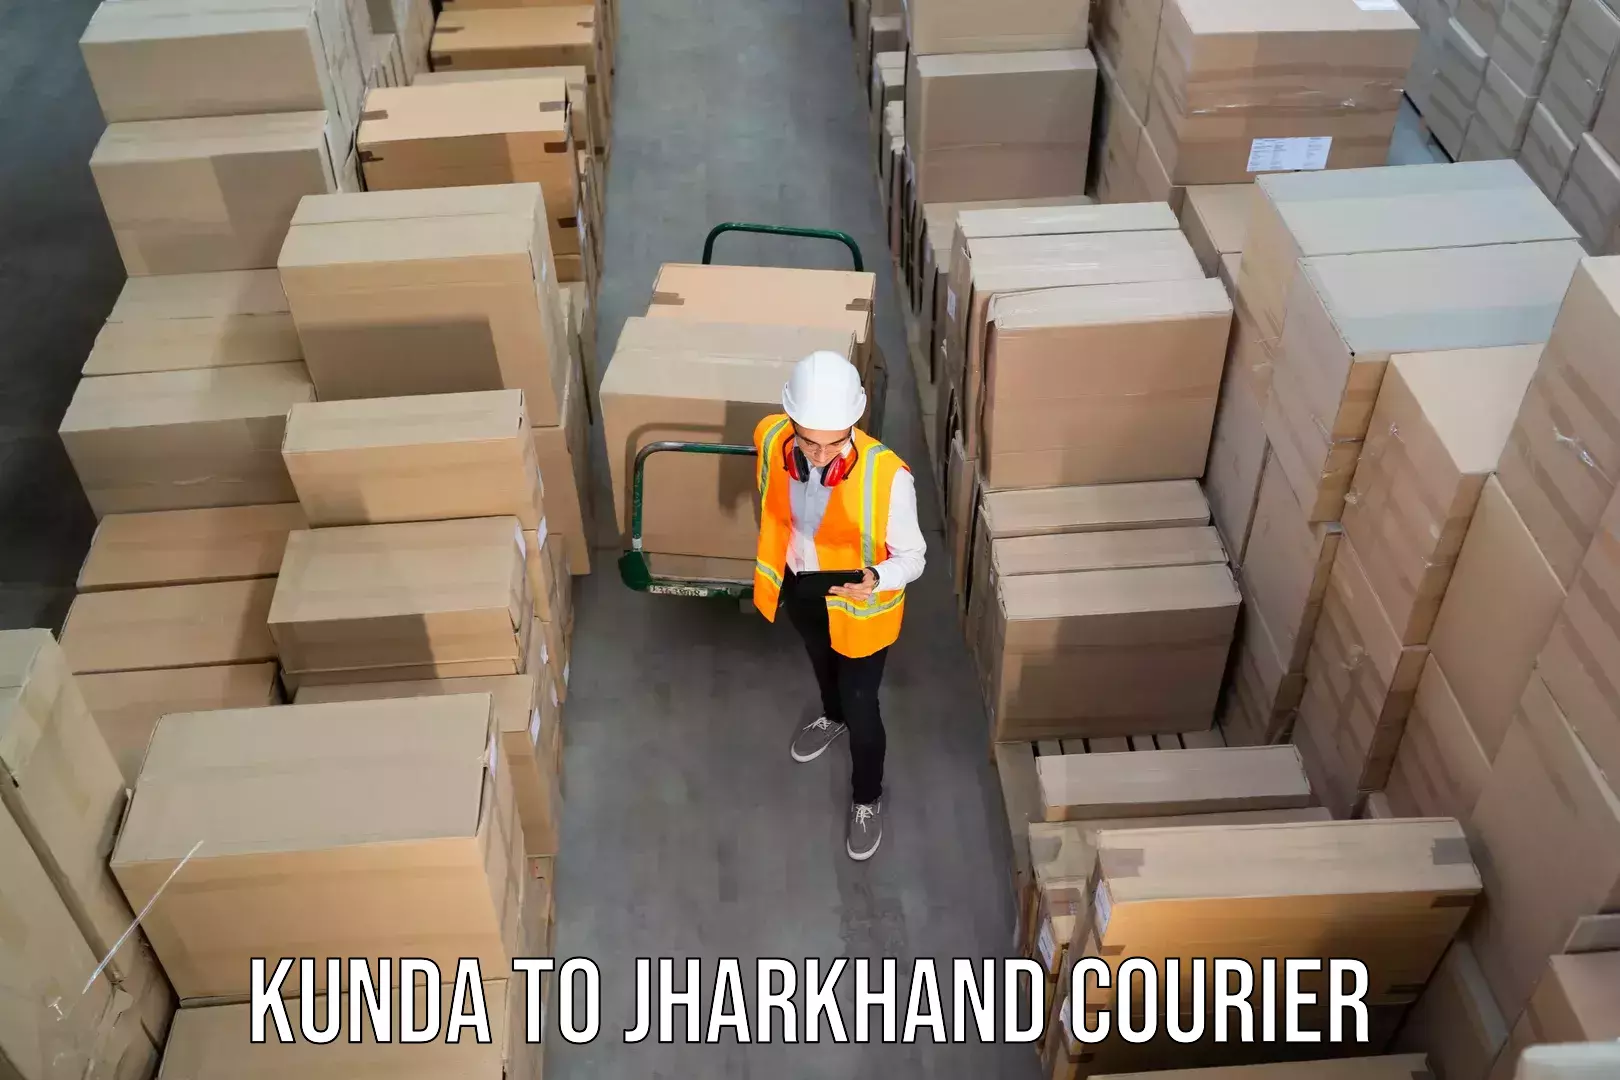 User-friendly delivery service Kunda to Jharkhand